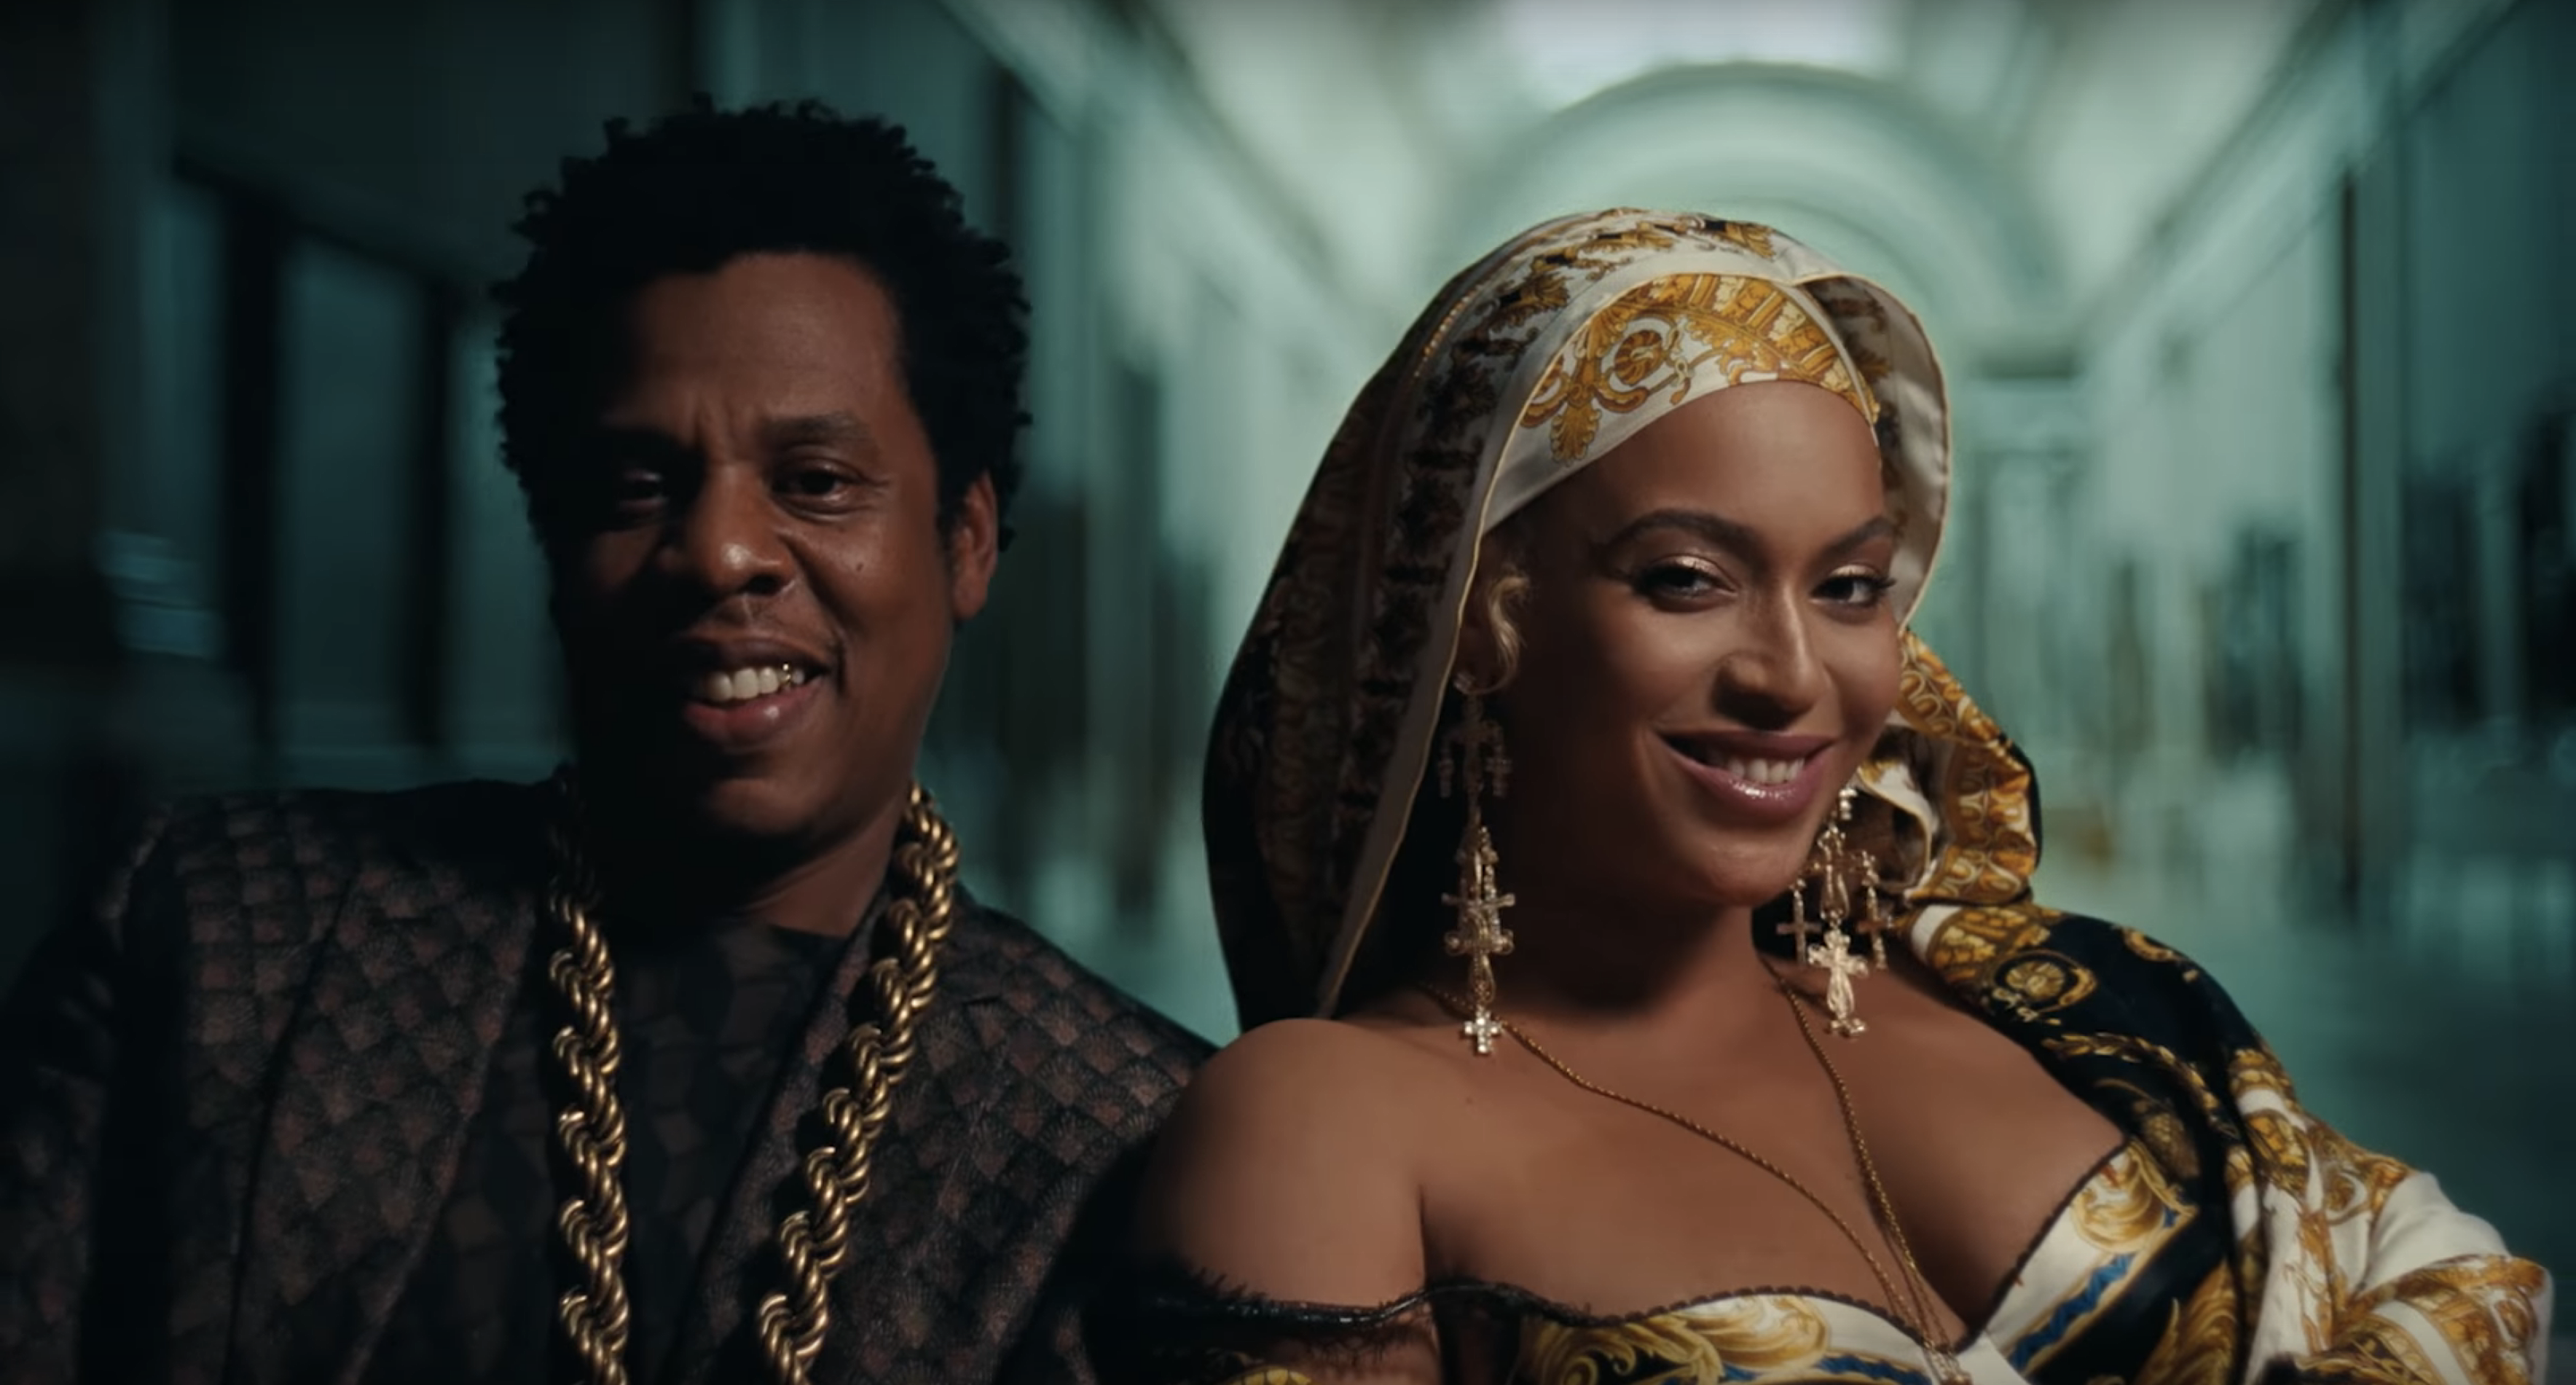 beyonce-jayz-carters-apeshit-video-043-1529195353.png